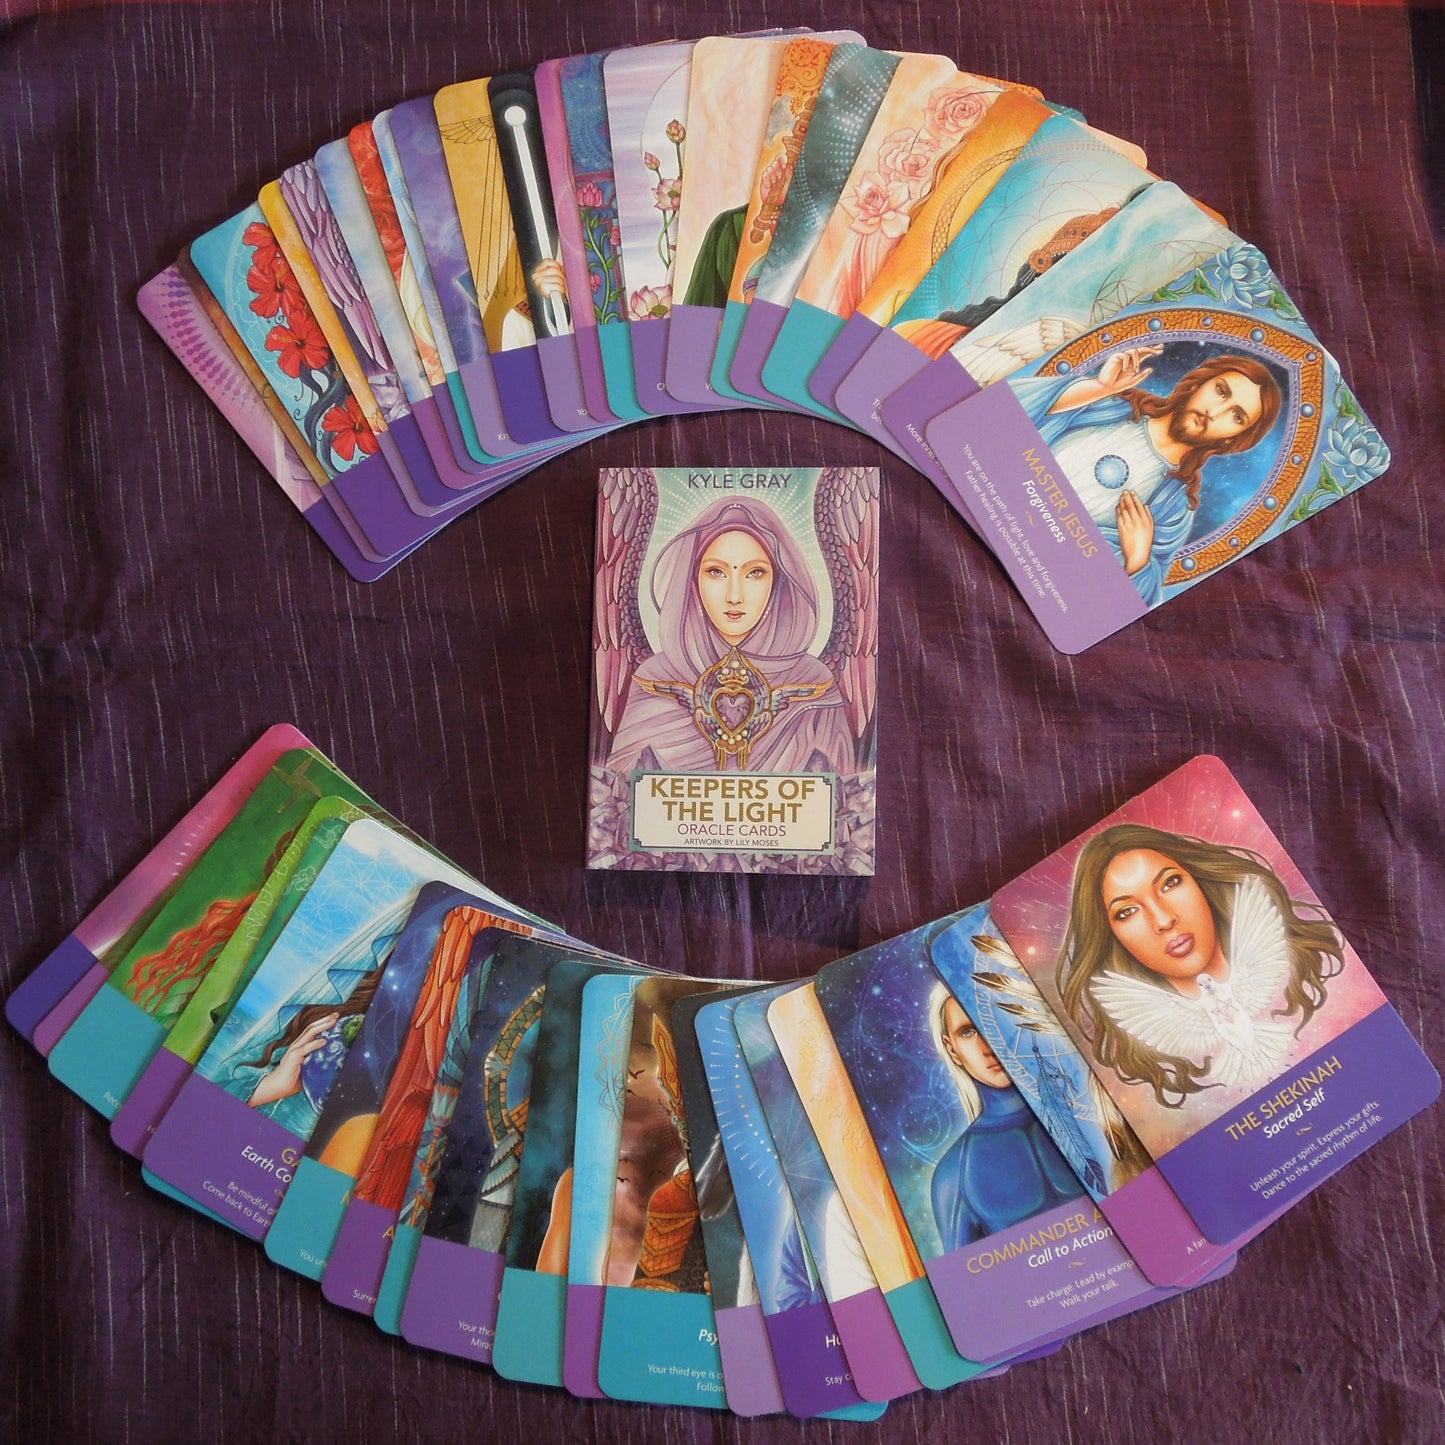 Keepers of the light Oracle Cards